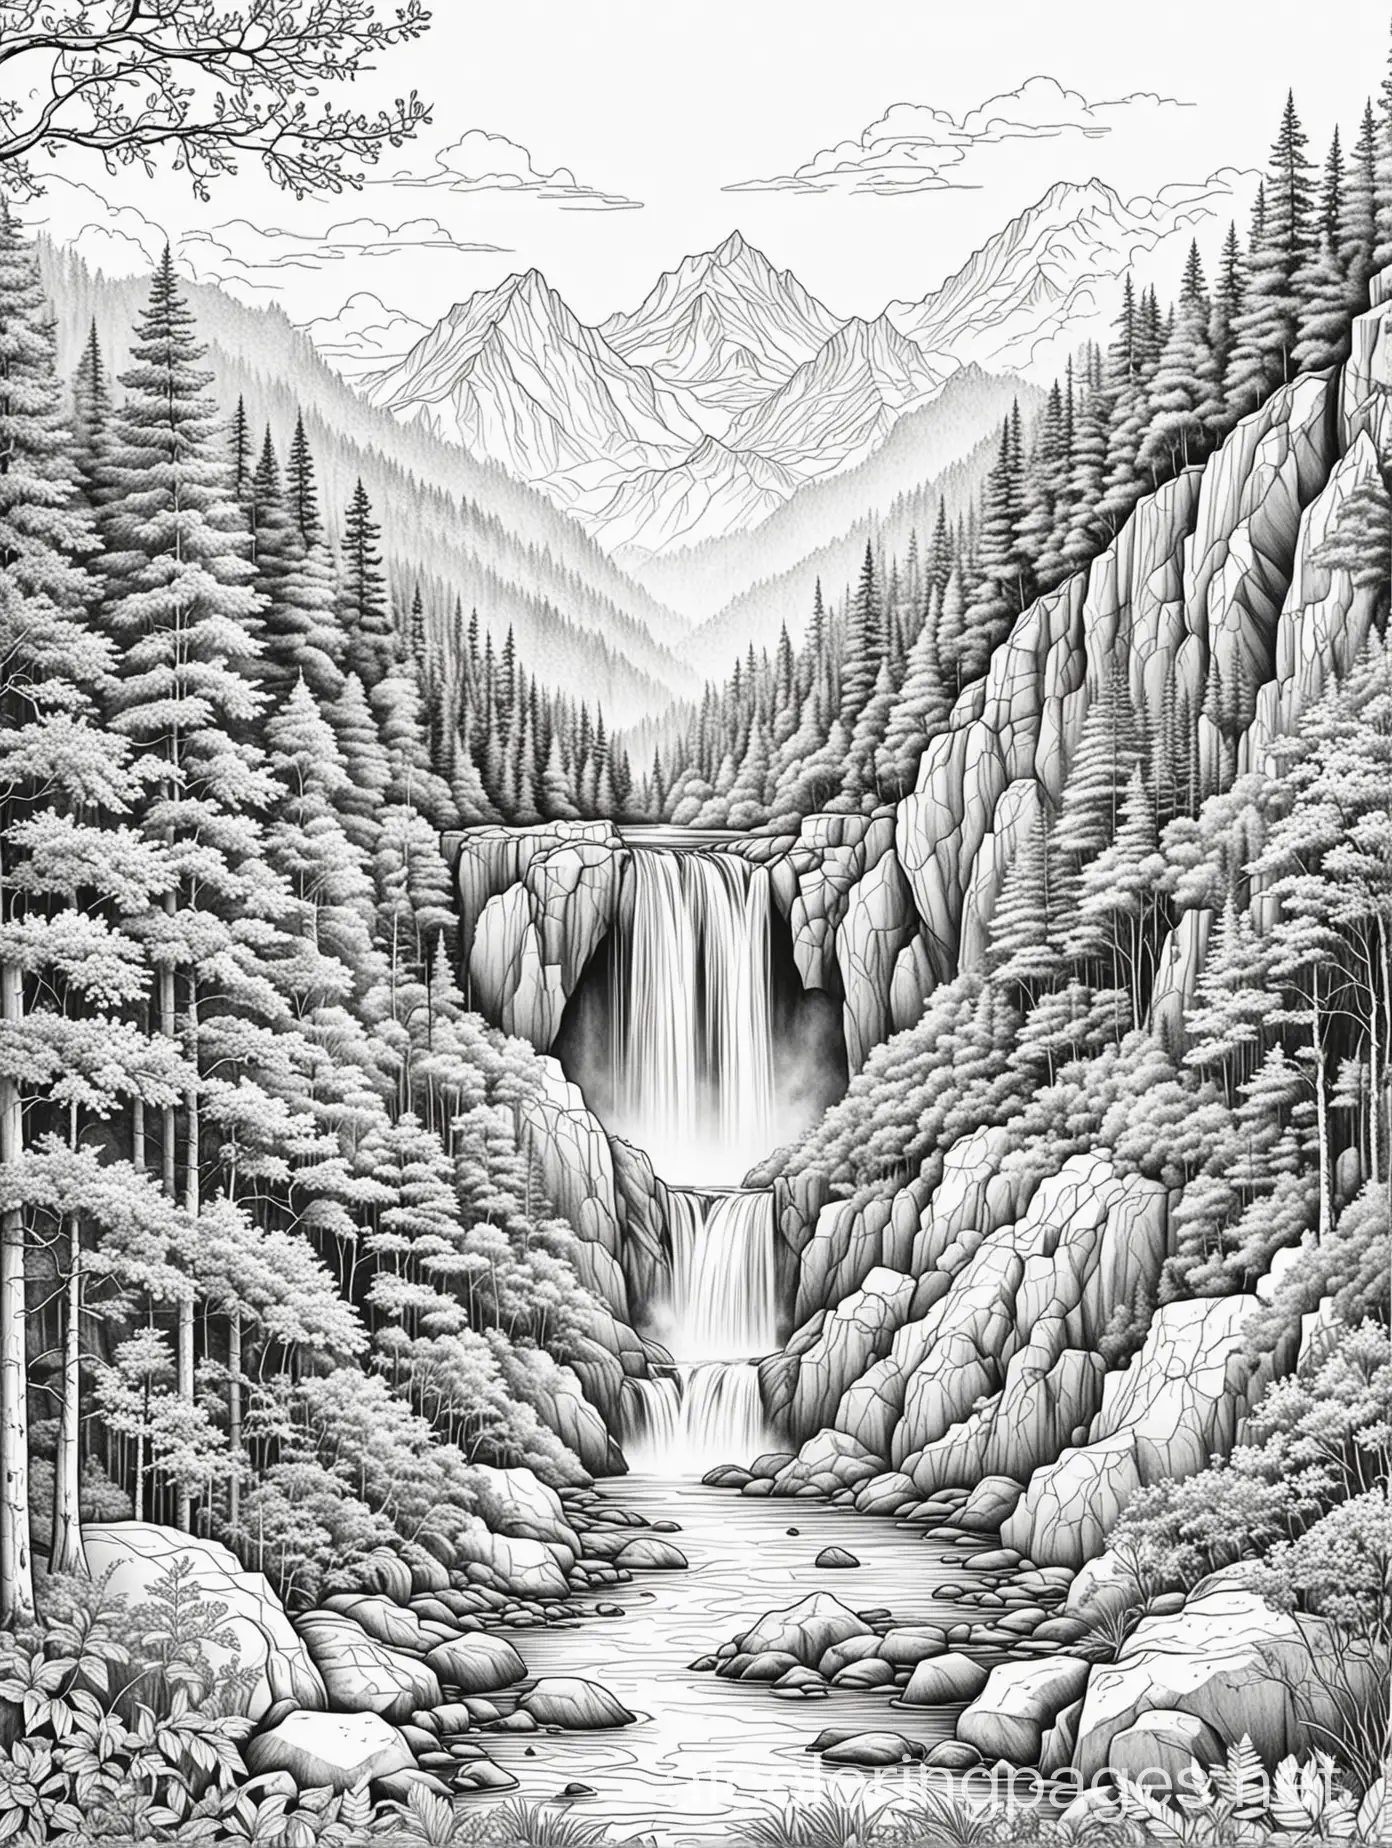  Coloring page for adults, stunning mountain landscape with forests and waterfall, black and white, line art, white background, Simplicity, Ample White Space. The page's background is plain white to facilitate coloring within the lines for young children. The outlines of all subjects are easily distinguishable, making it easy for kids to color without much difficulty.